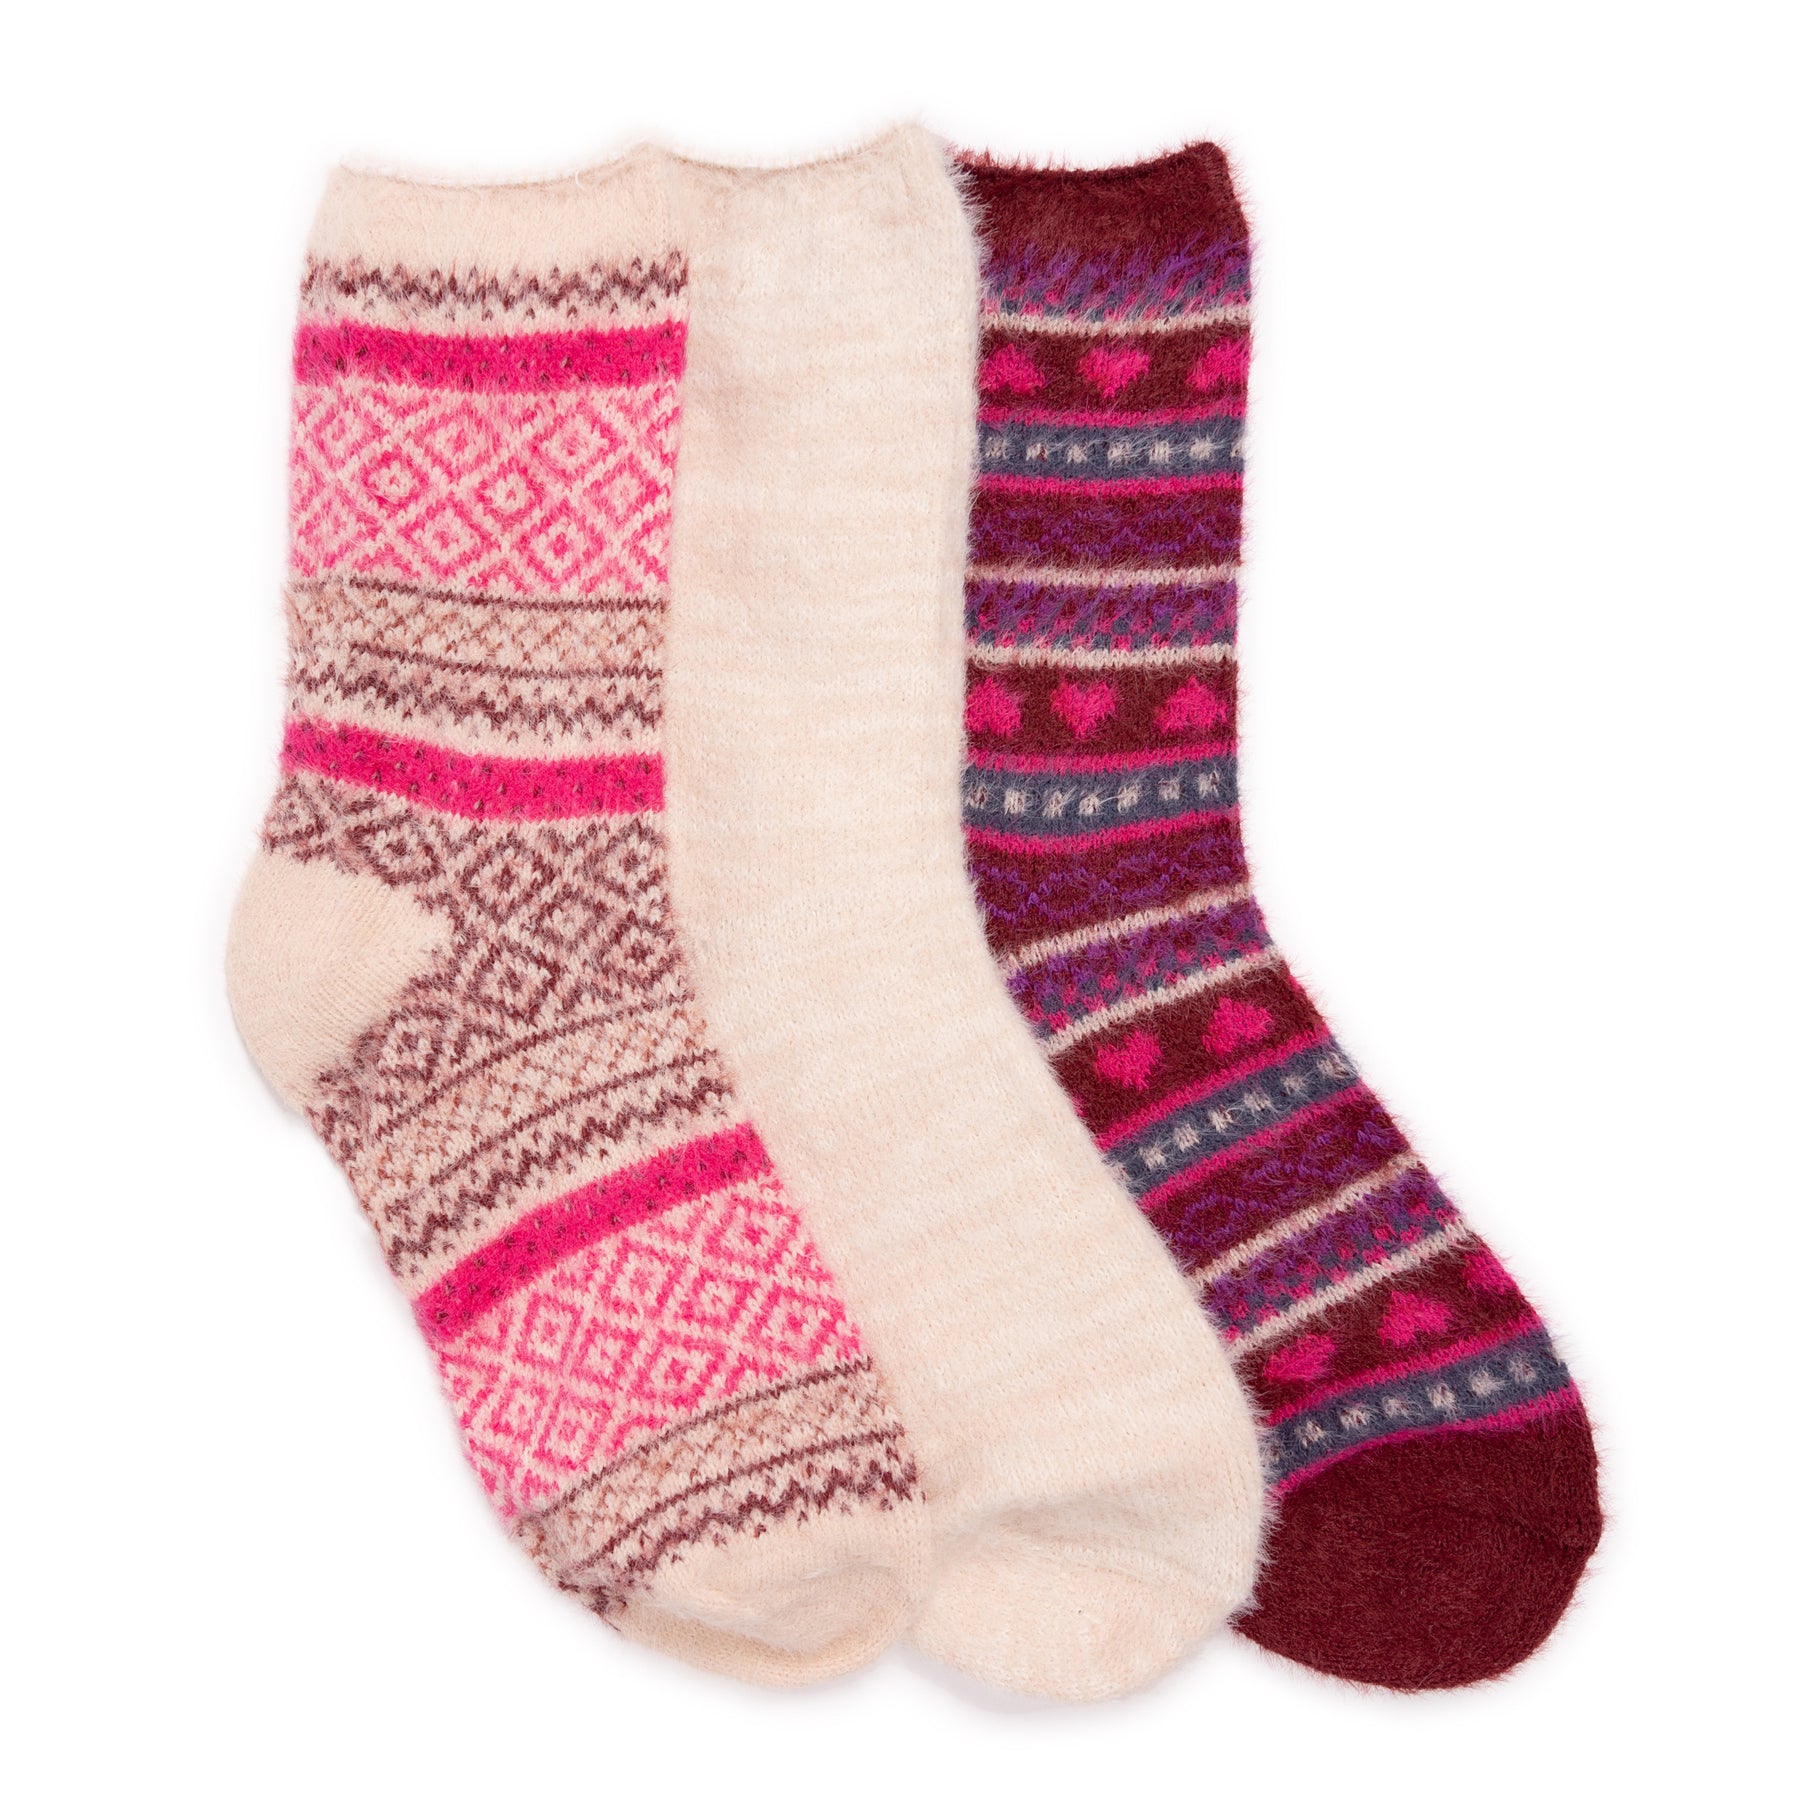 The 15 Best Pairs of Fuzzy Socks to Buy in 2022 - PureWow